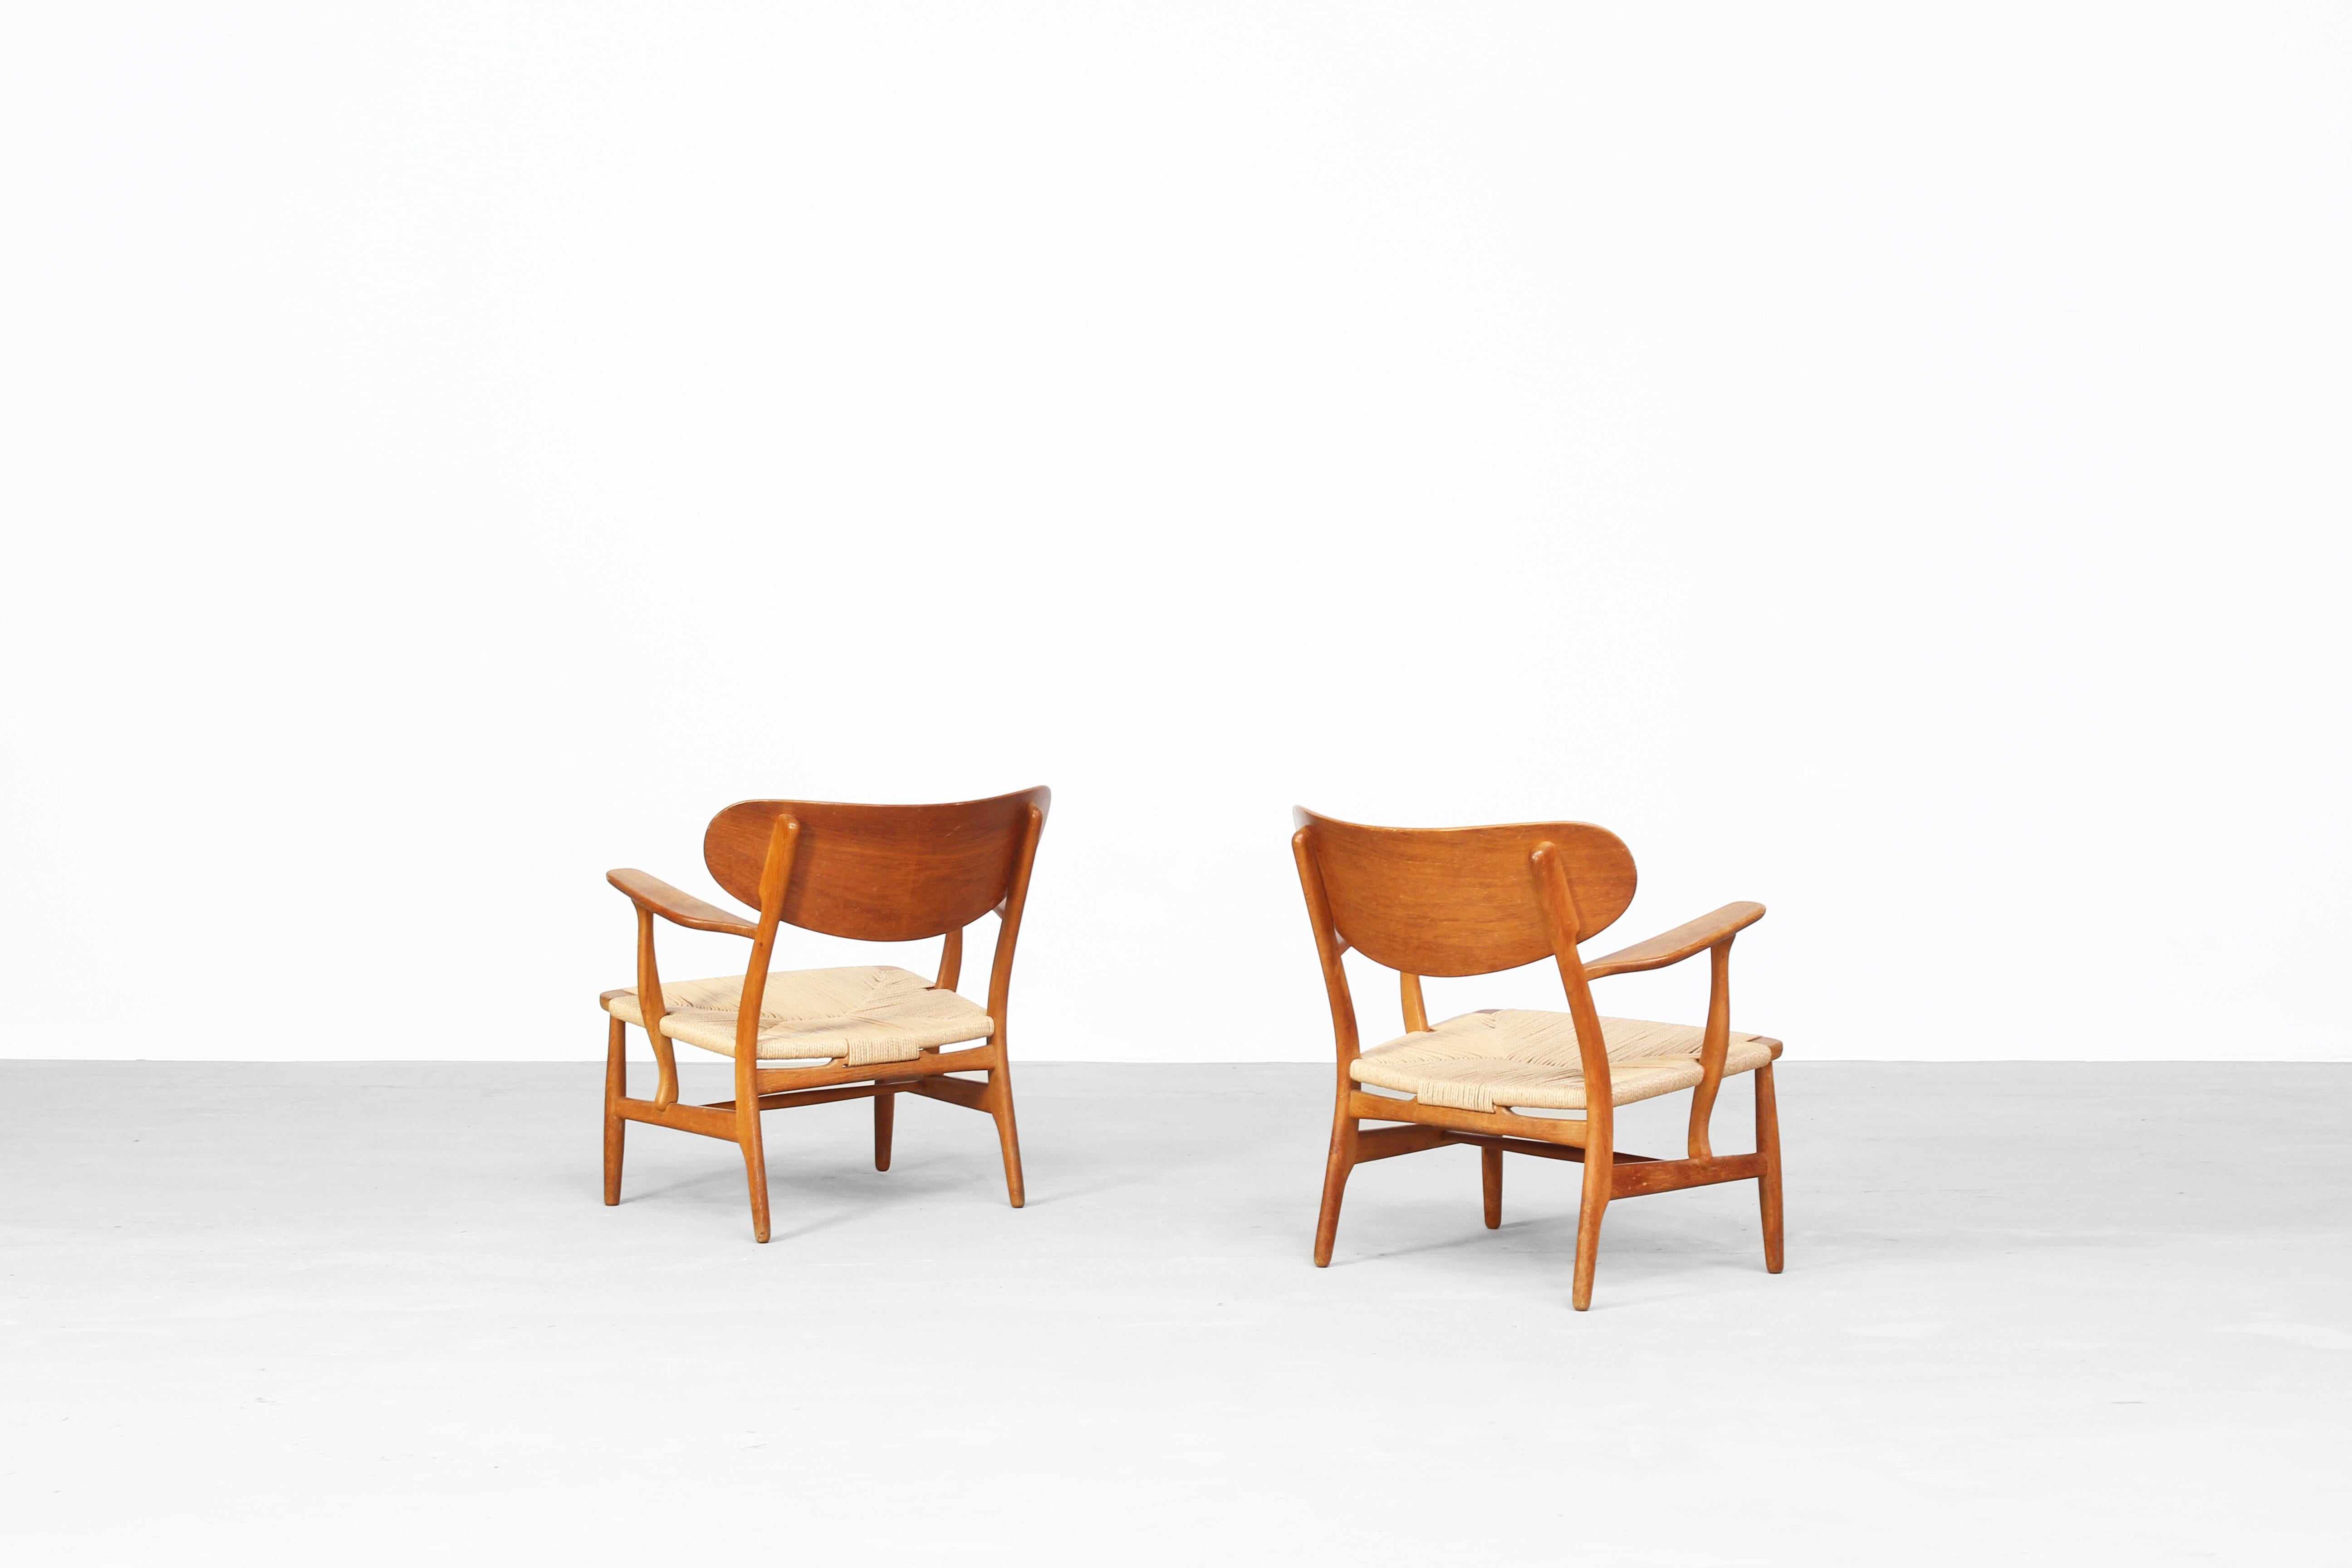 A beautiful pair of lounge chairs designed by Hans J. Wegner manufactured by Carl Hansen, made in Denmark.
Both chairs are made out of oak and come in a very good condition with just little traces of usage.